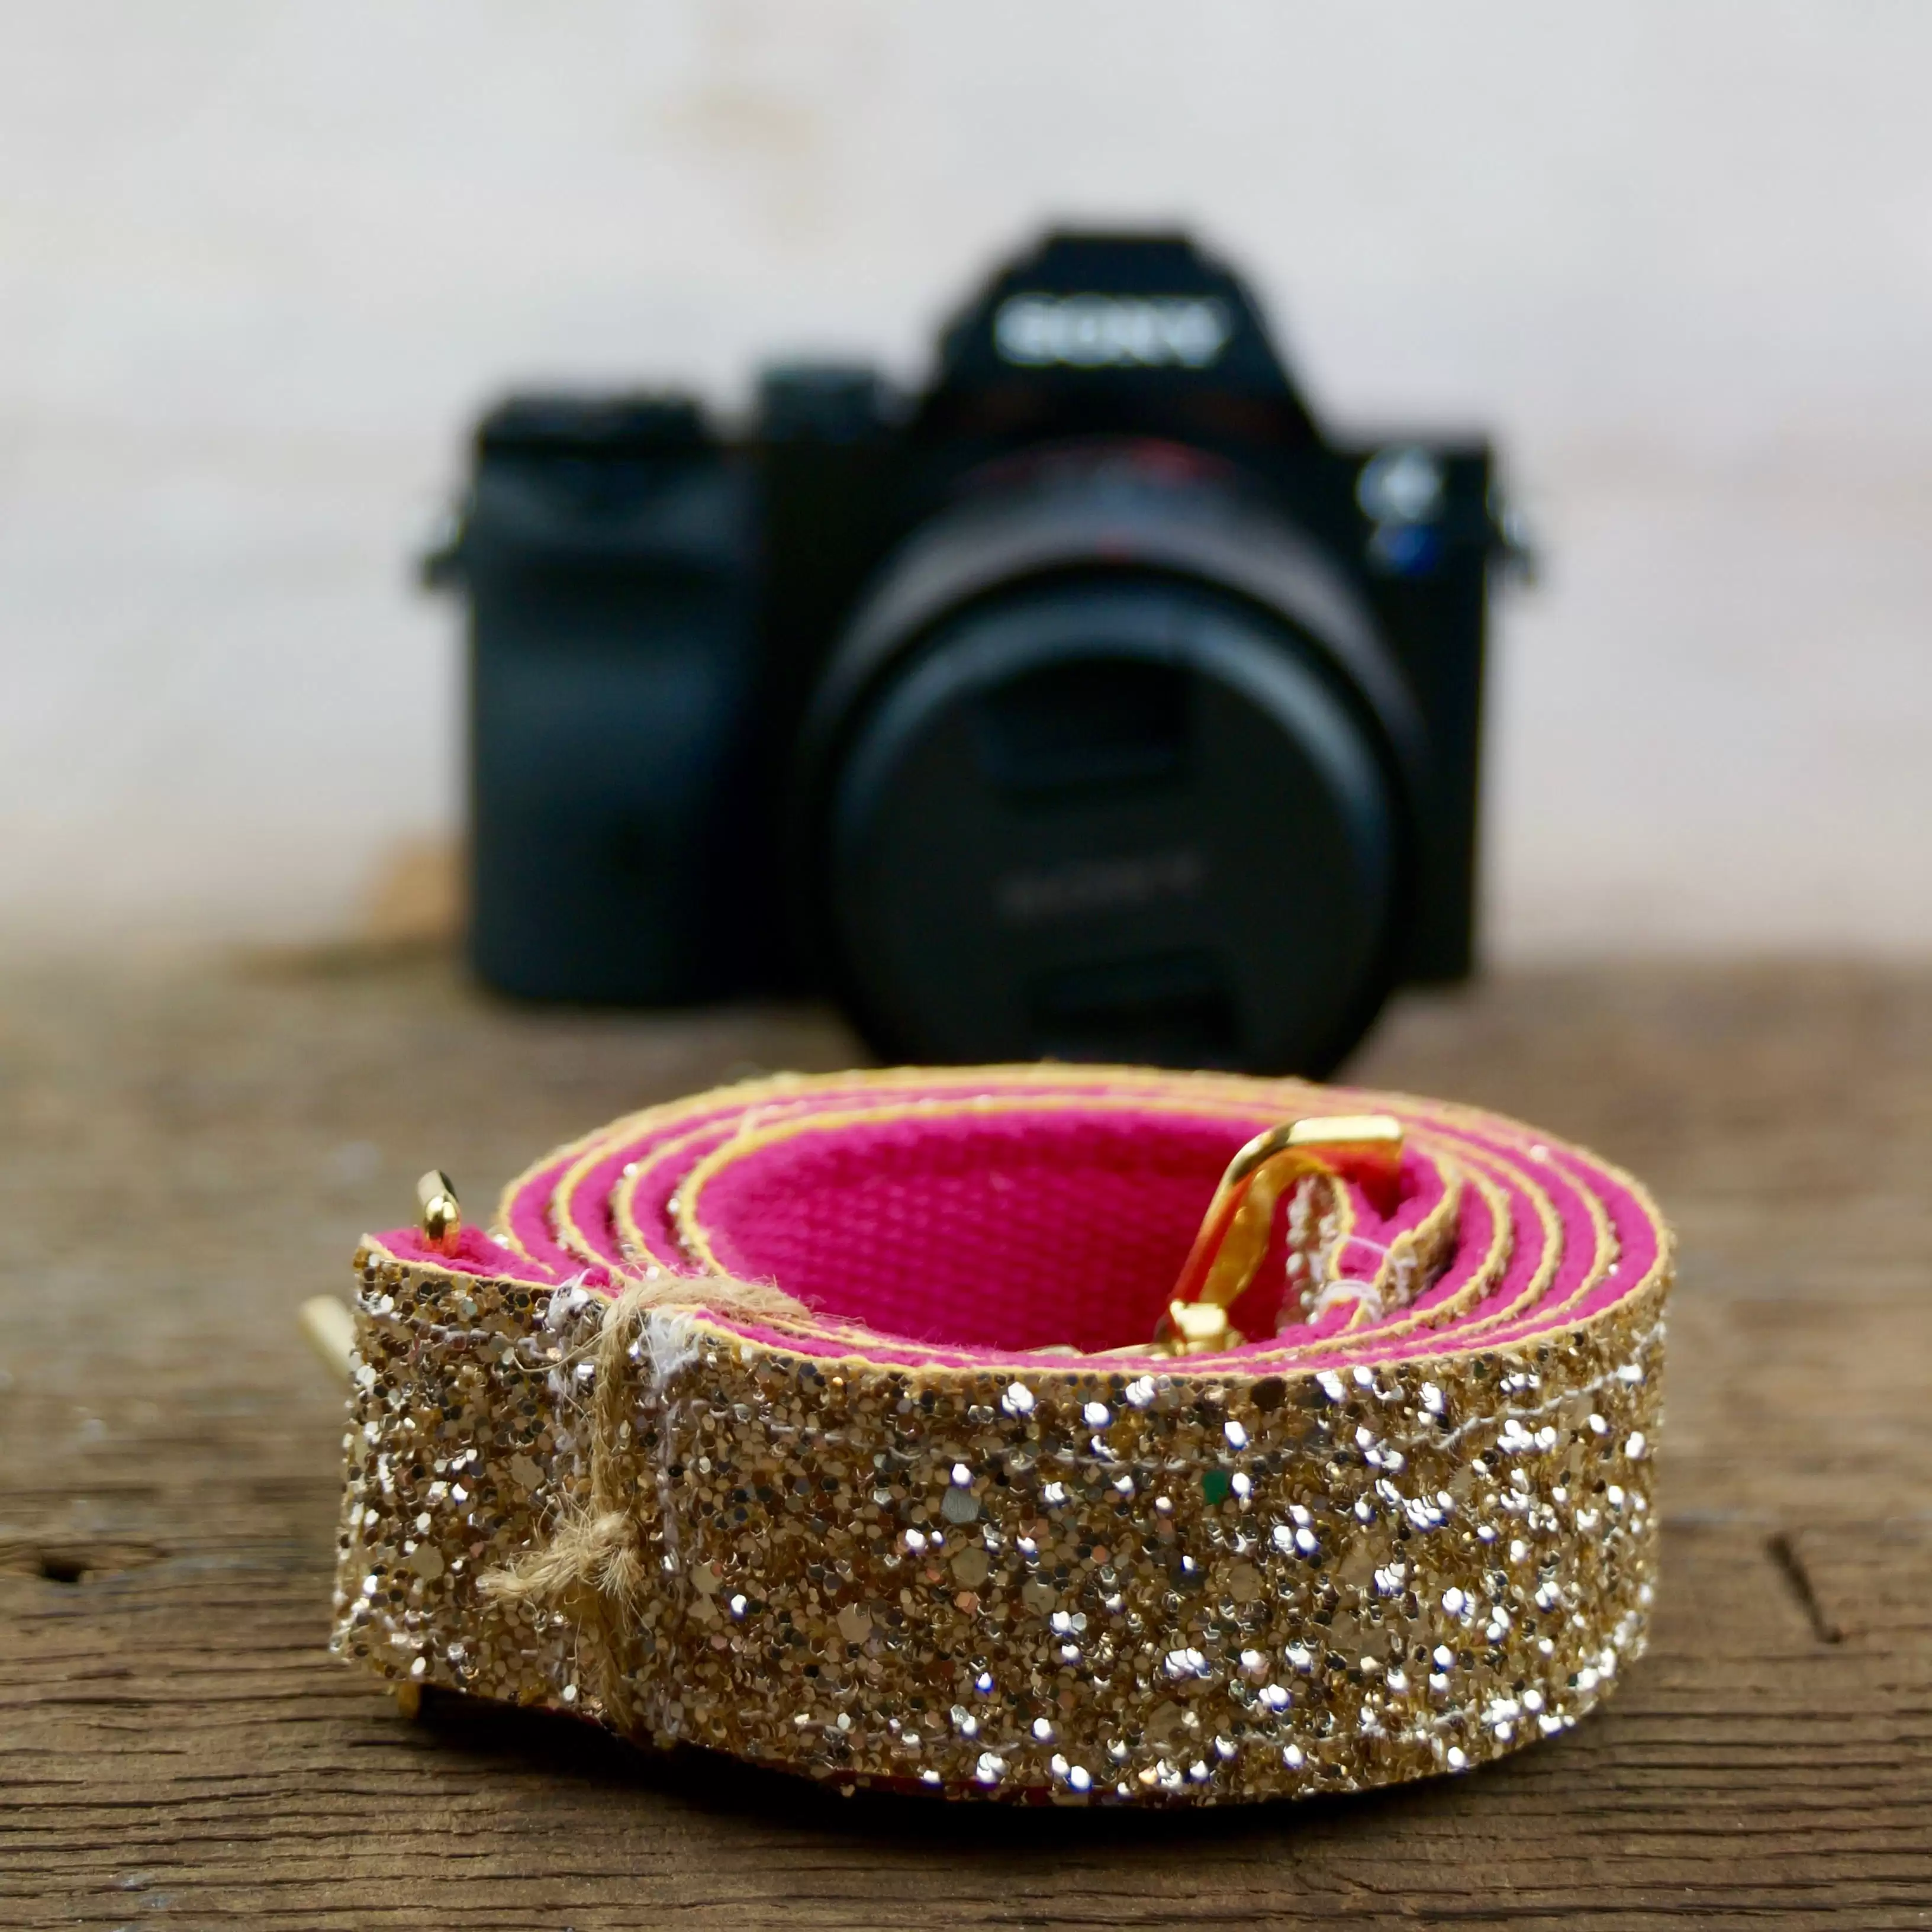 Camera with a gold sparkly belt on a wooden table